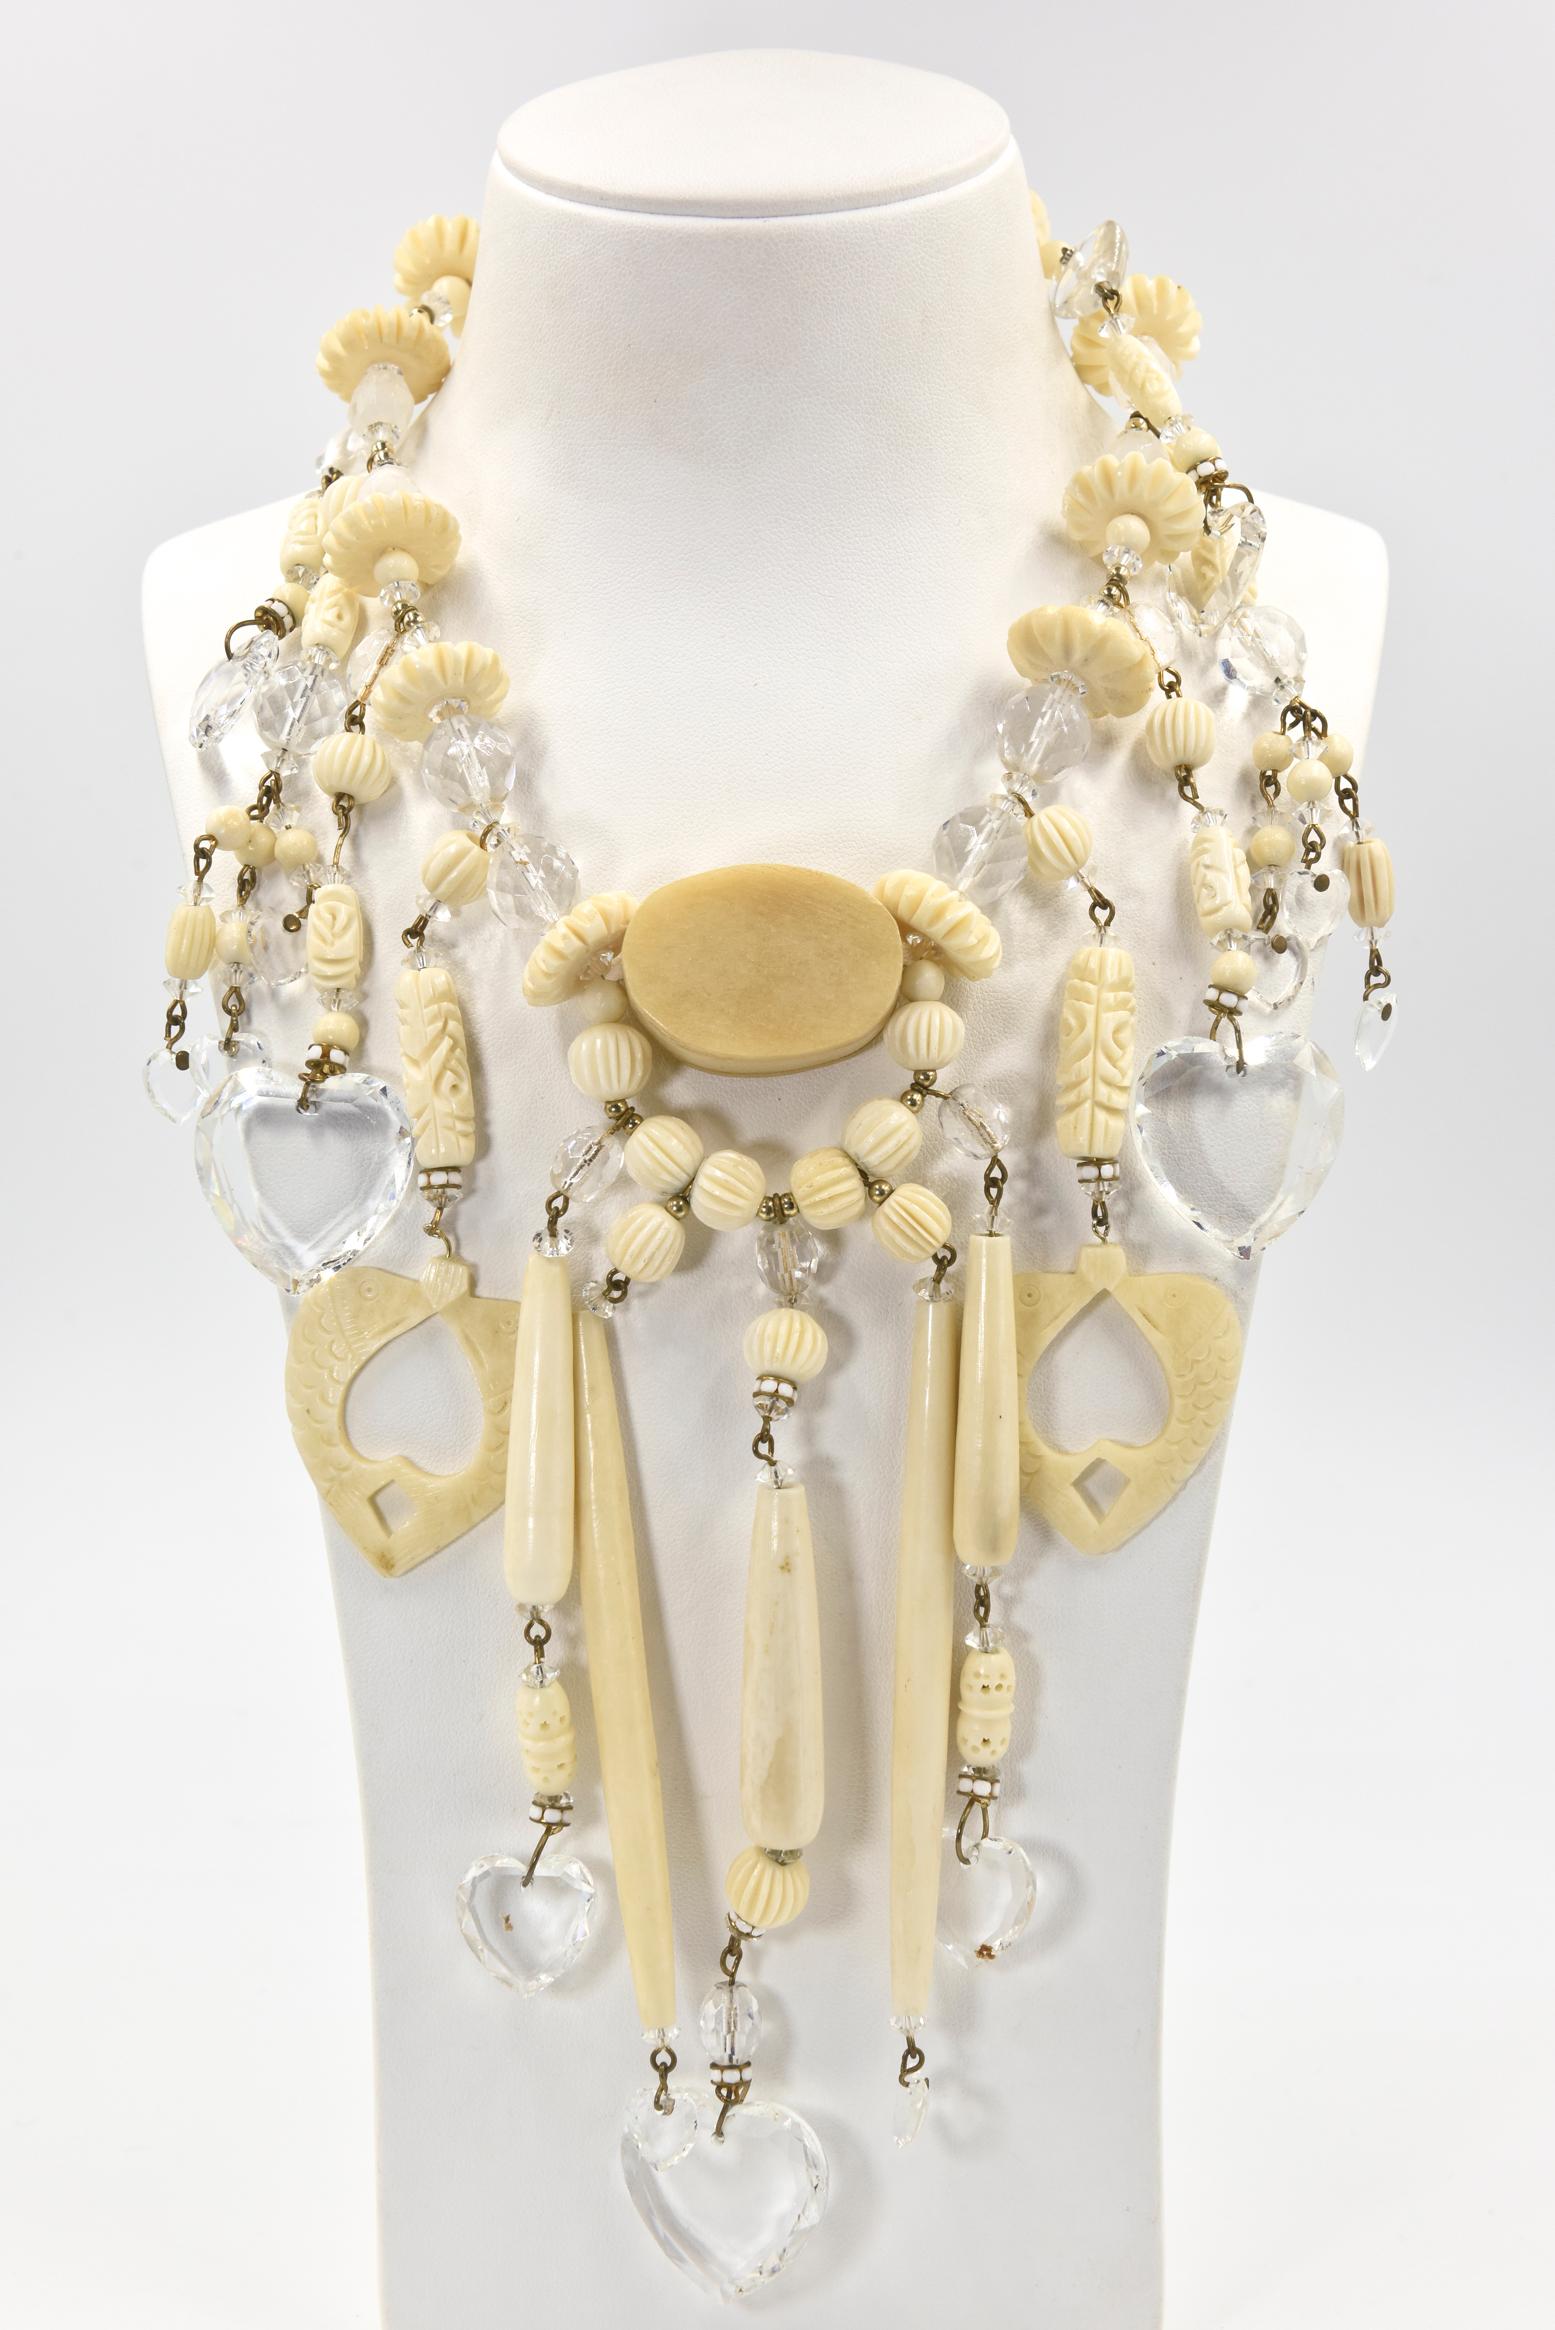 From a Miami socialite's estate, this necklace and matching earrings  are truly a statement piece.  Made in the 1980's, the necklace has carved and smooth bone pieces with gold tone bead accents as well as facetted crystal beads and hearts.    The